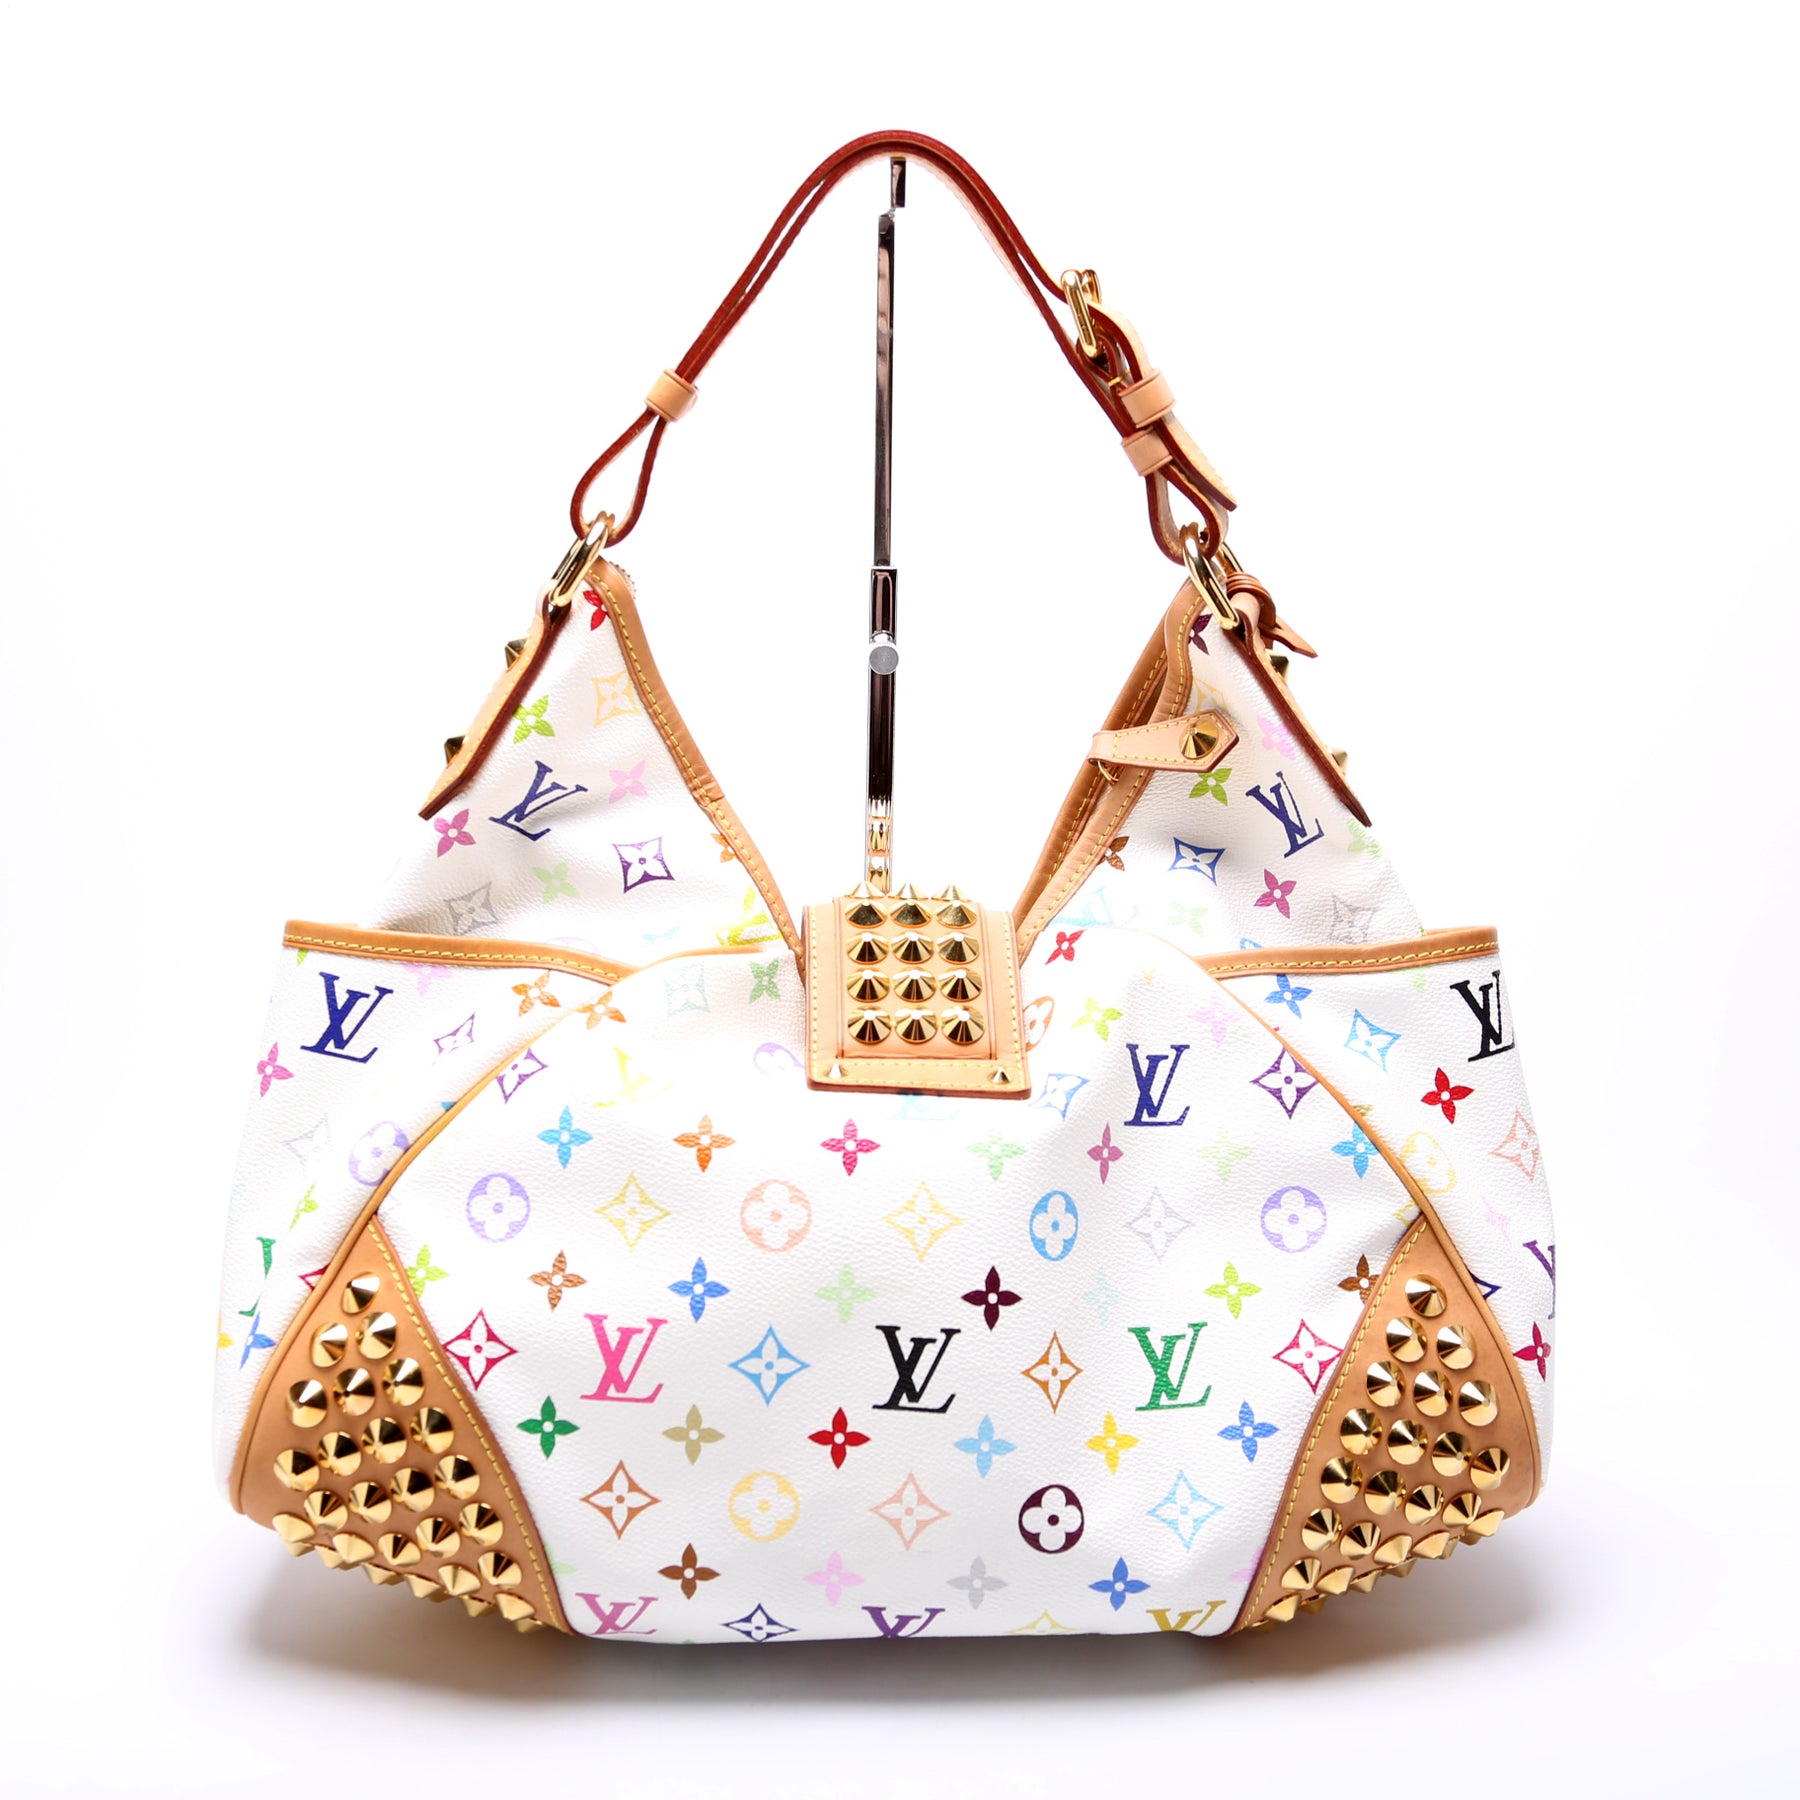 Chrissie leather tote Louis Vuitton Multicolour in Leather - 29825467